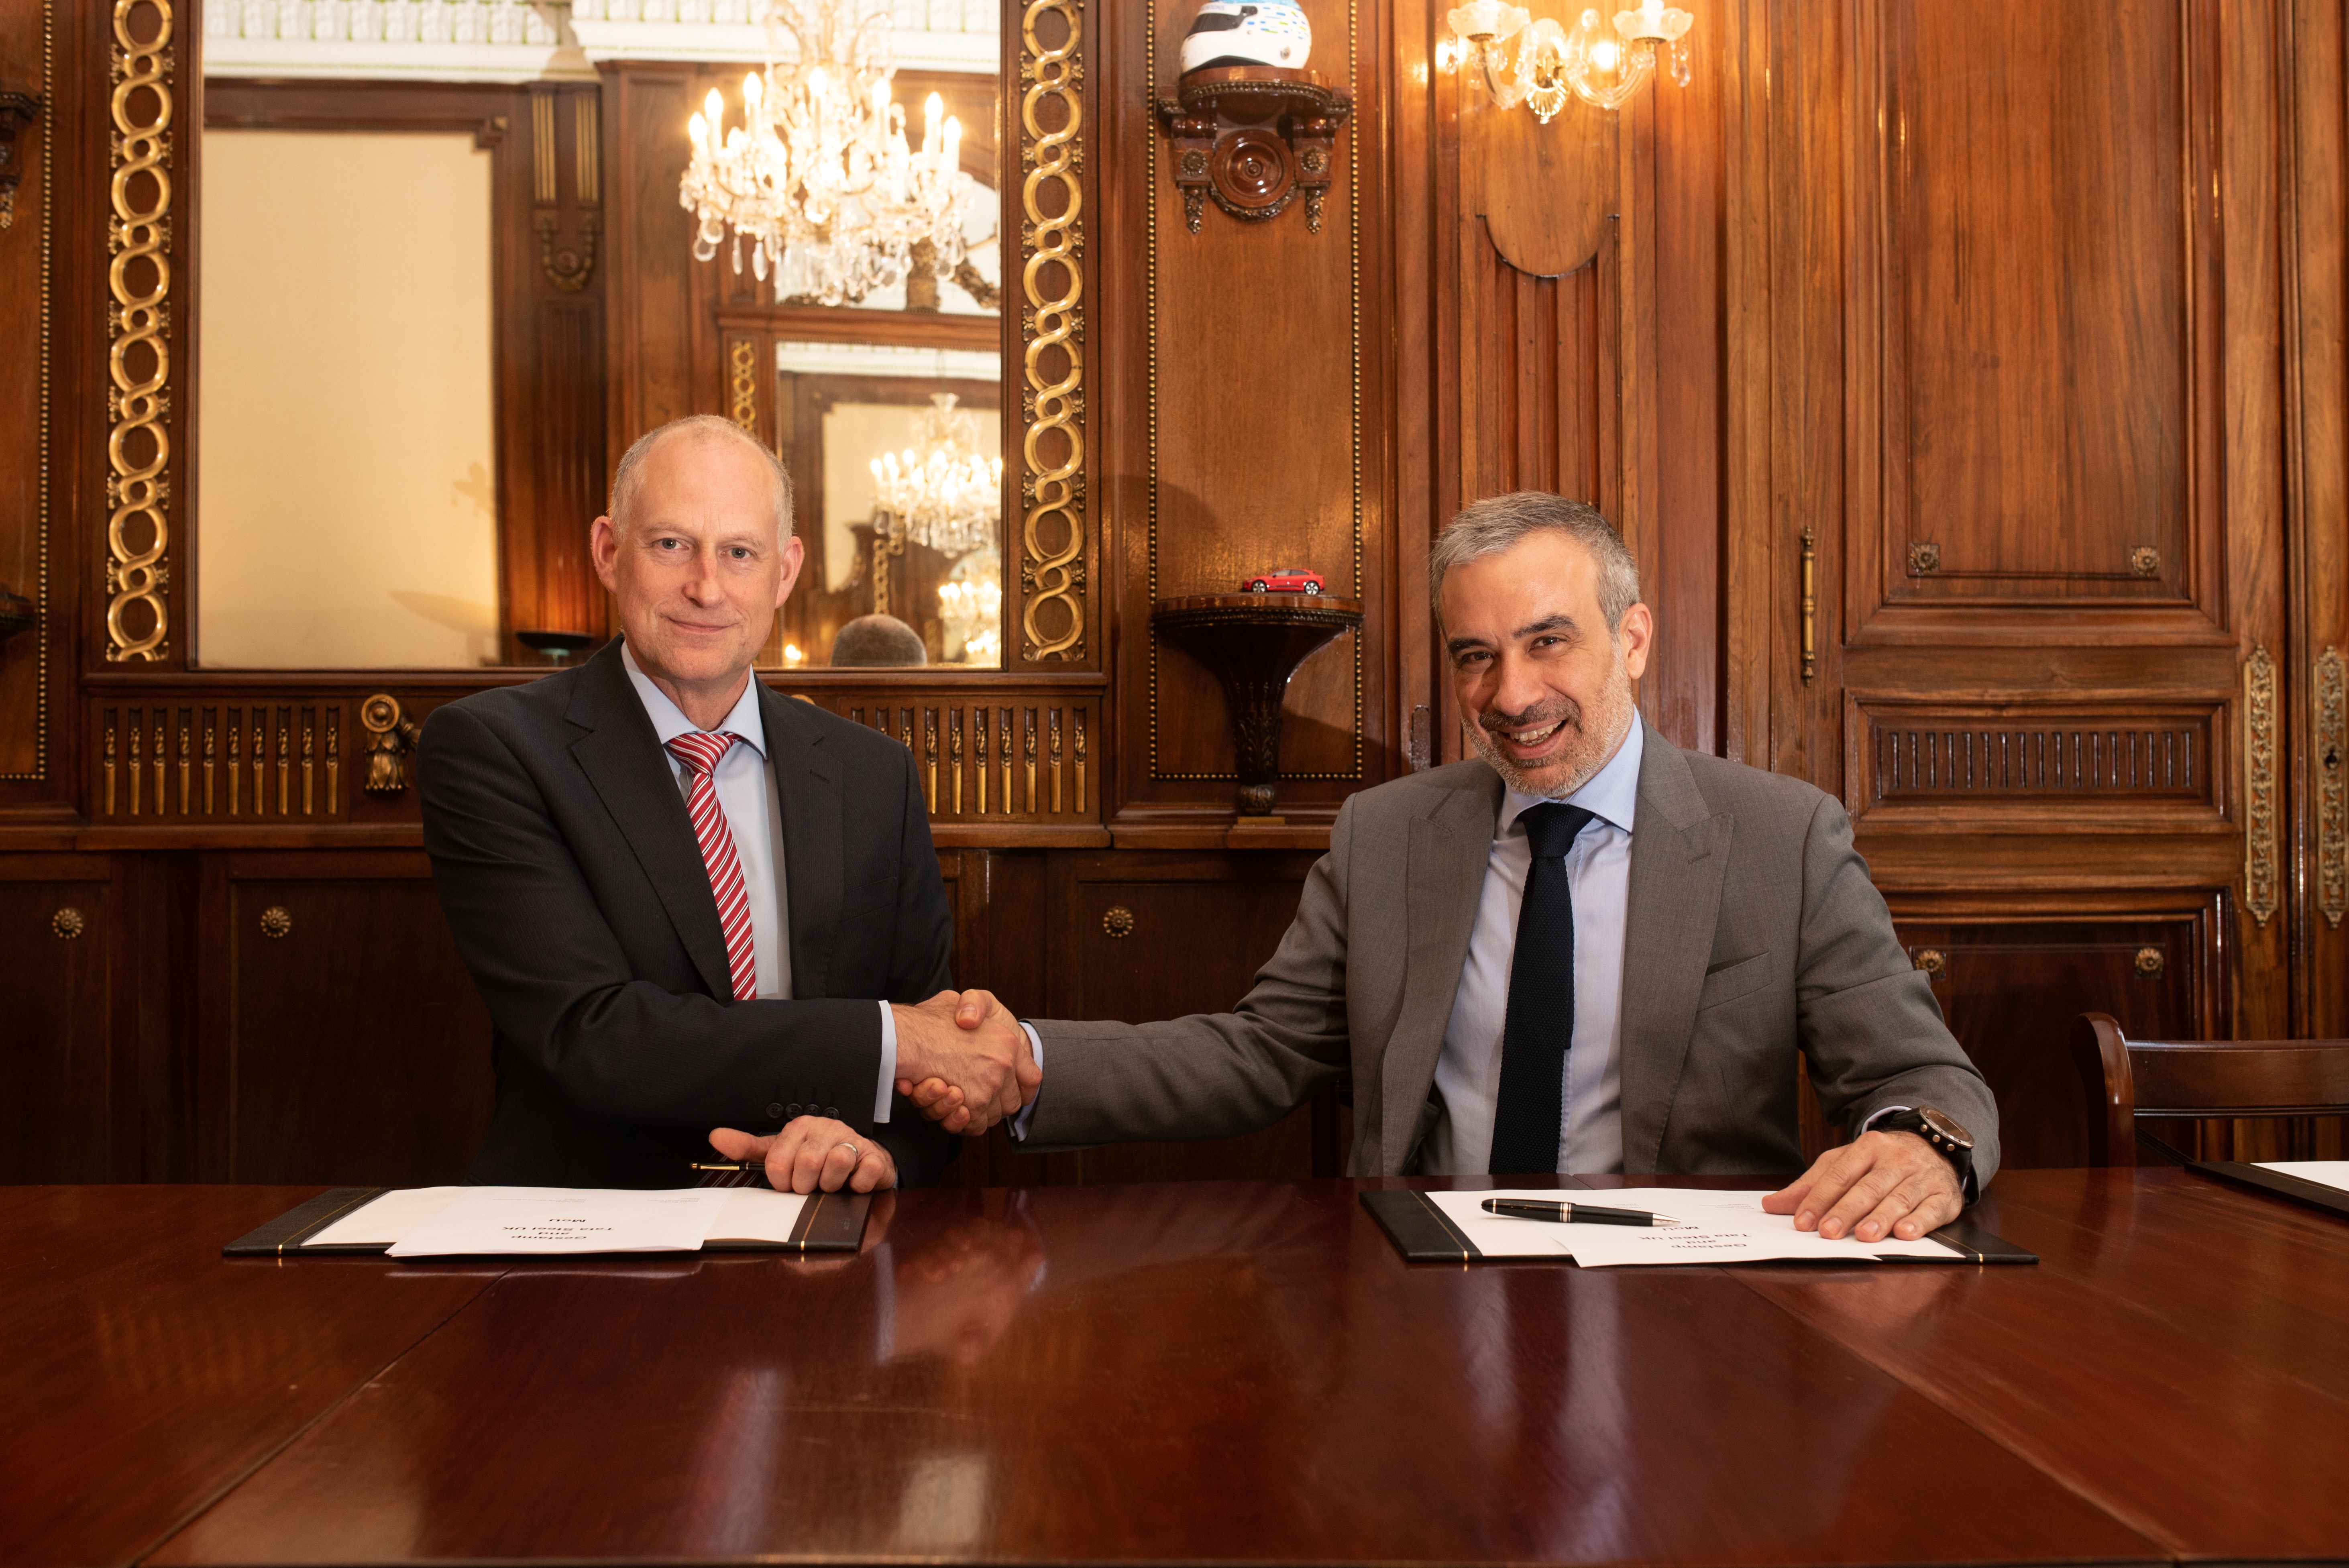 From left to right, Peter Quinn (Tata Steel) and Ernesto Barceló (Gestamp)